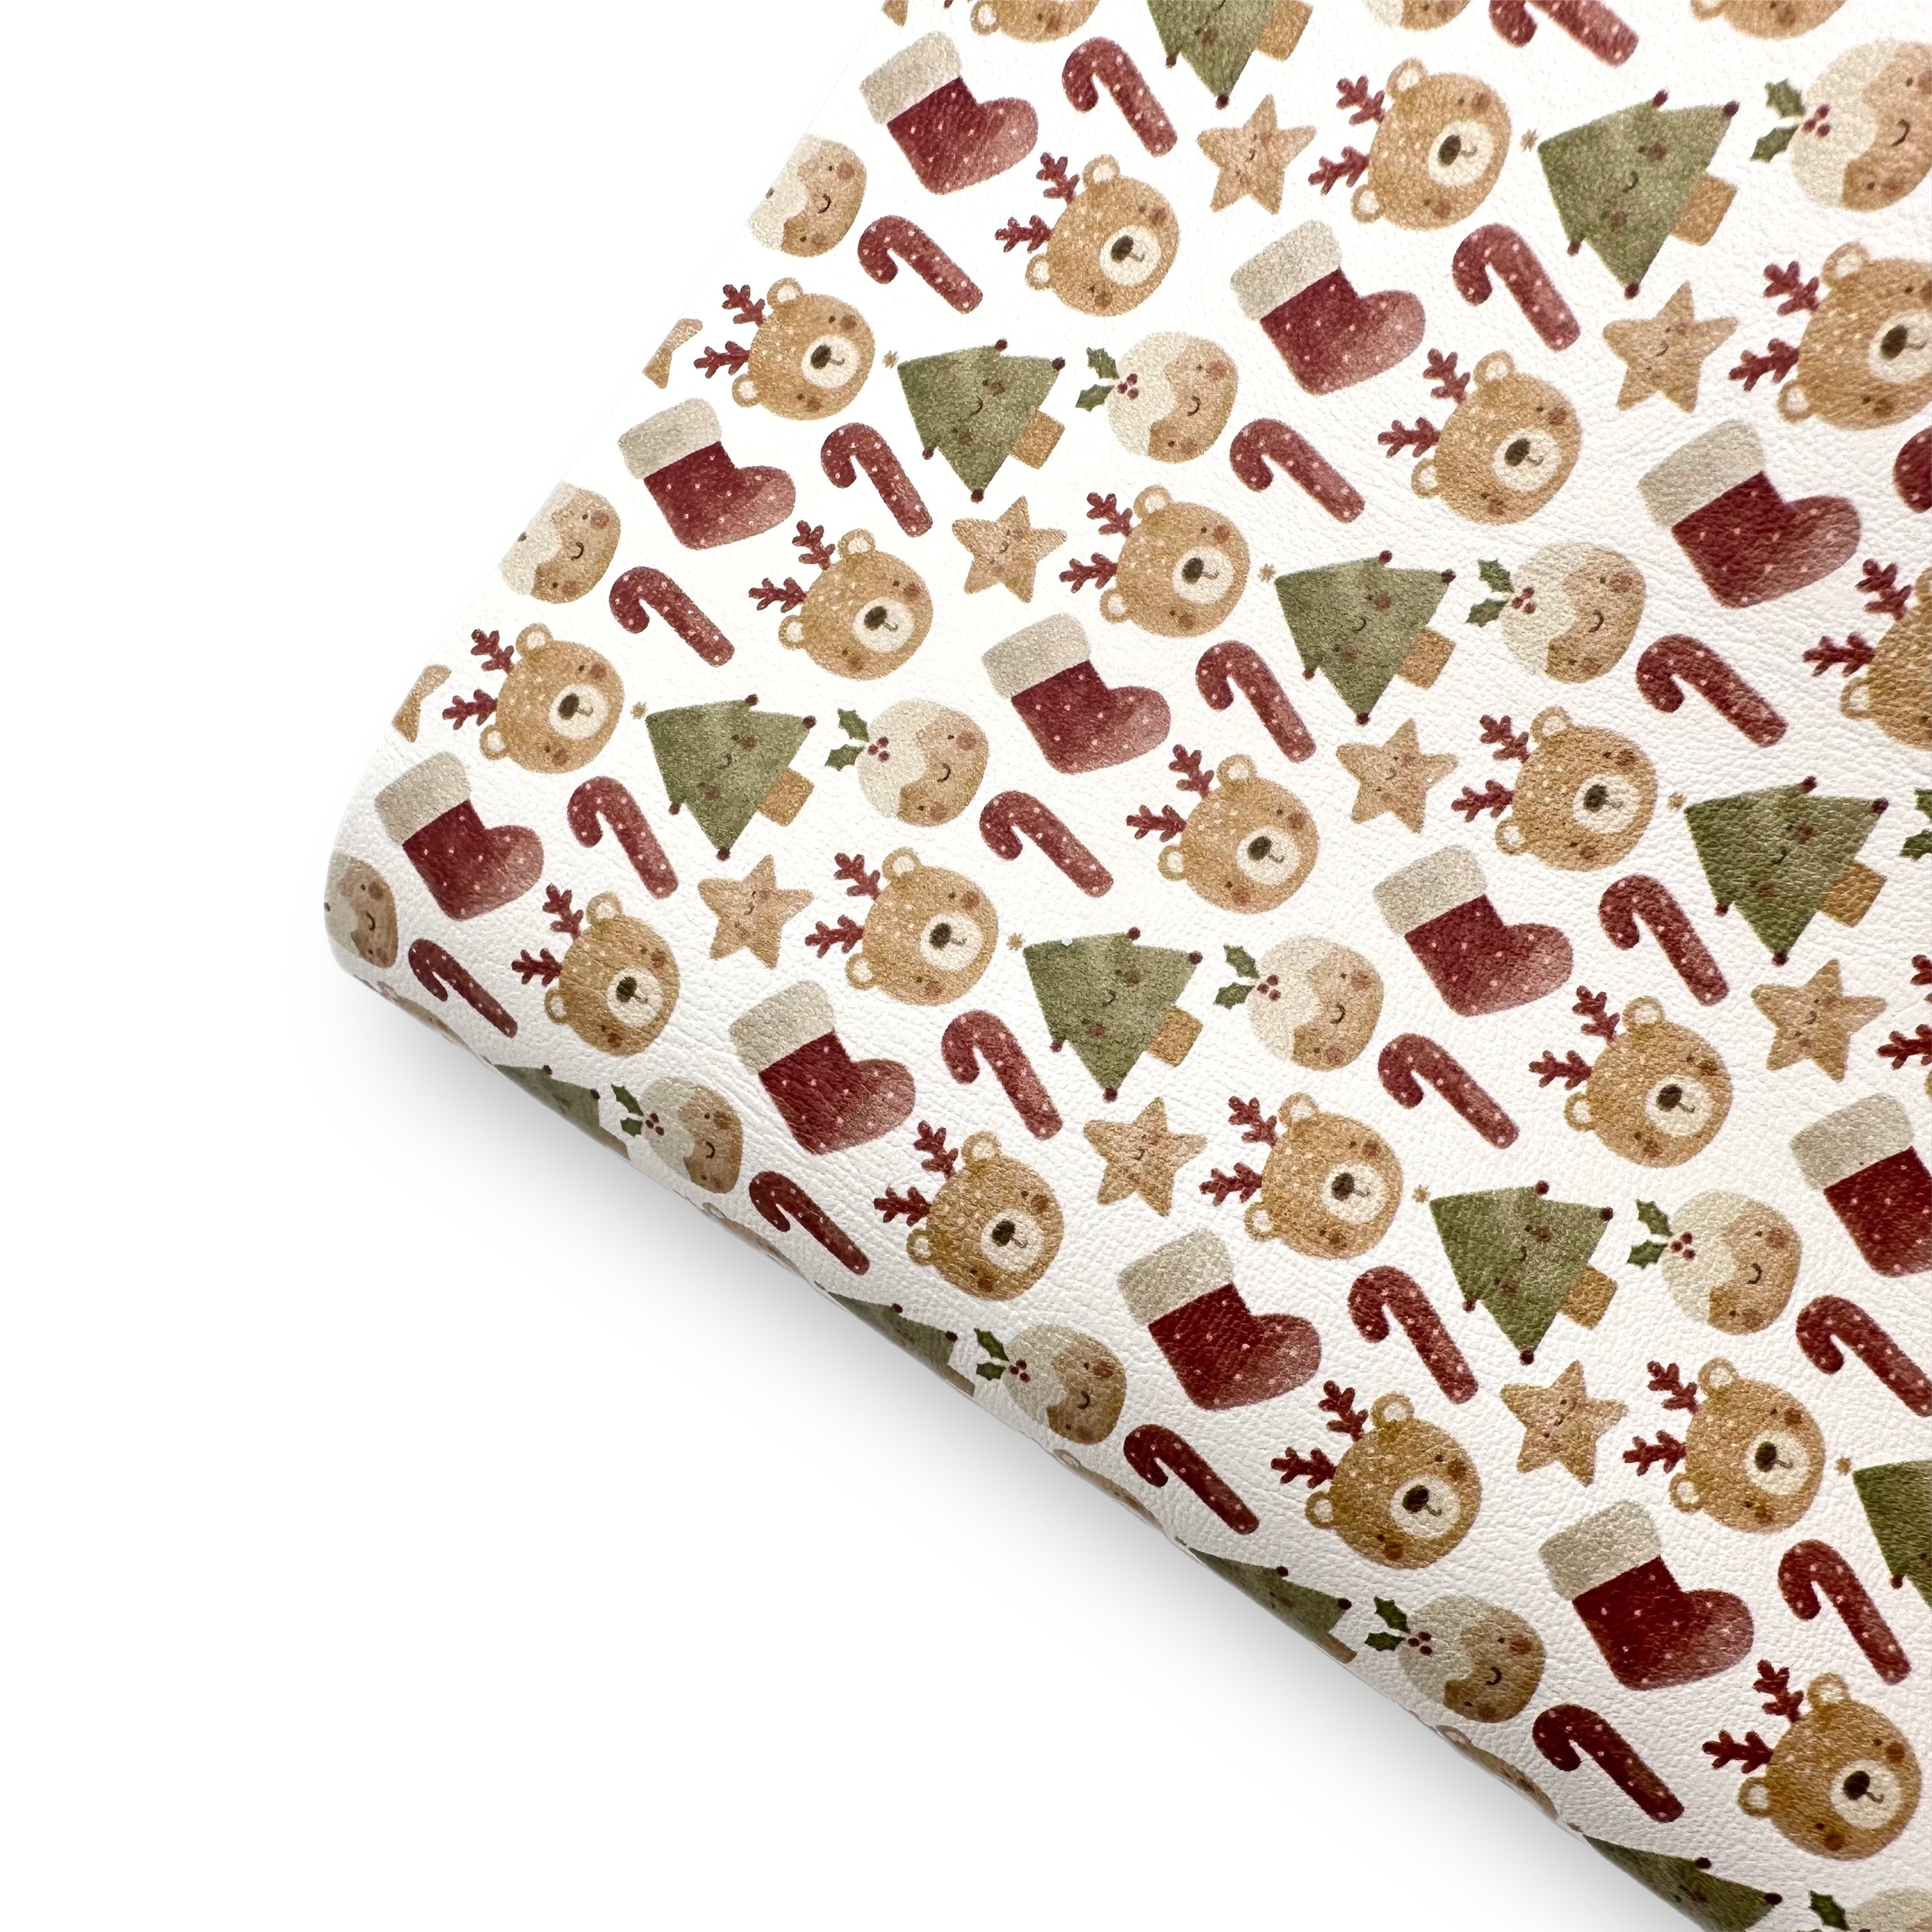 Sweet Christmas Premium Faux Leather Fabric Sheets